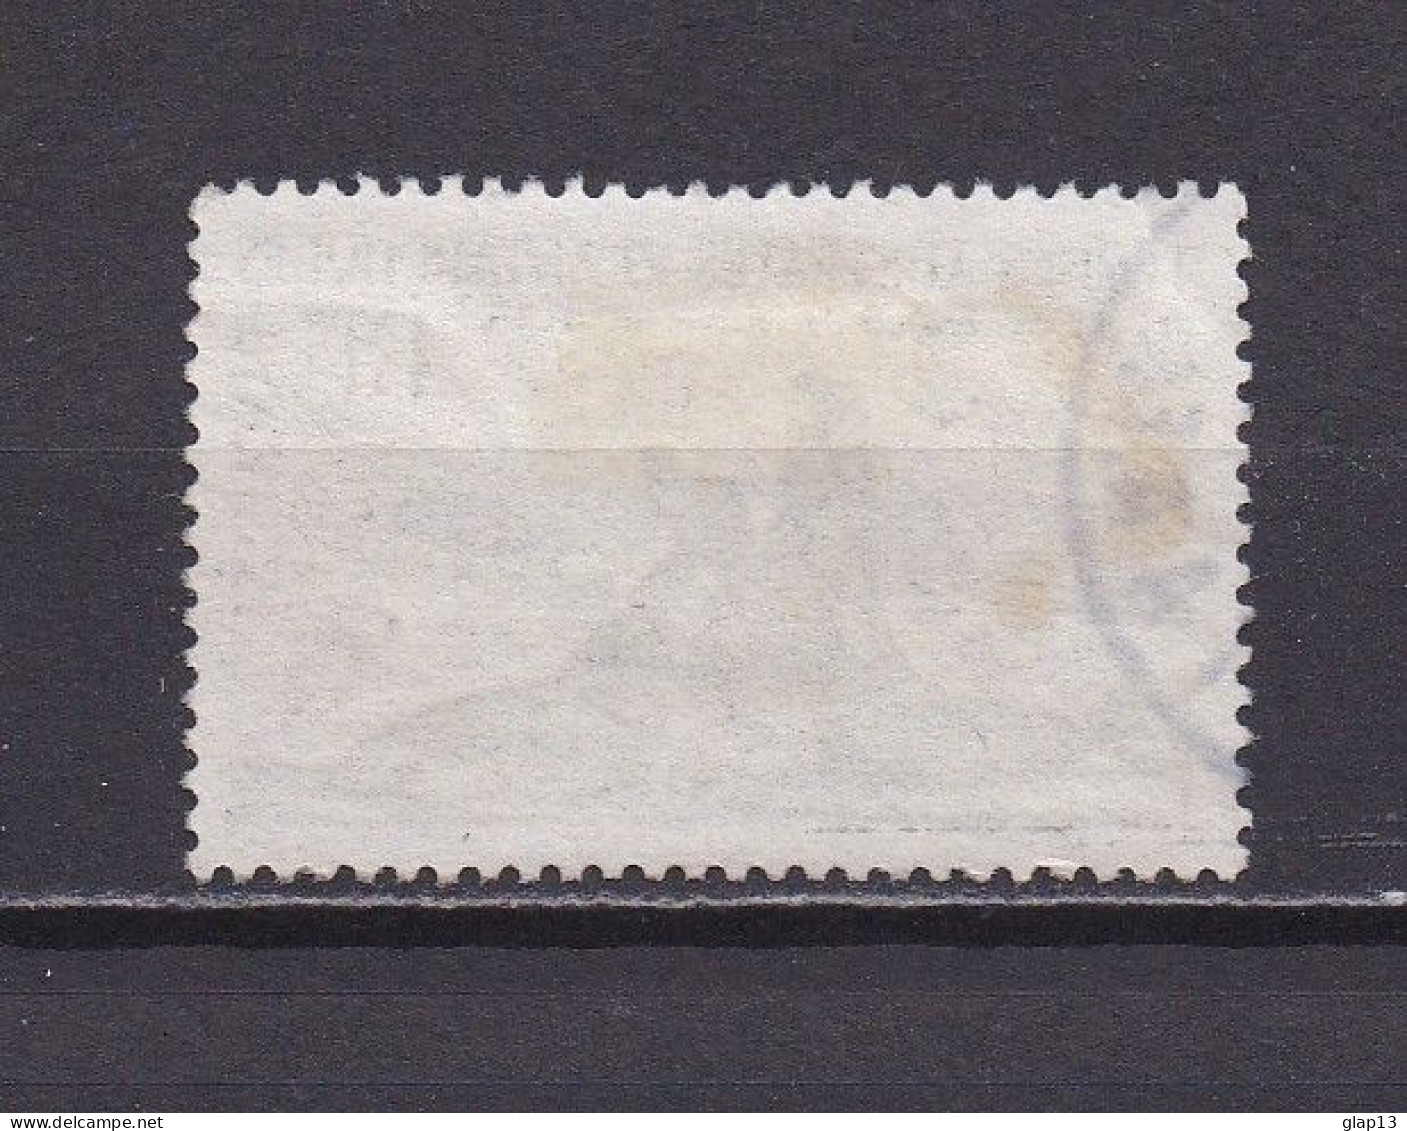 TAAF 1959 TIMBRE N°13C OBLITERE ELEPHANTS DE MER - Used Stamps